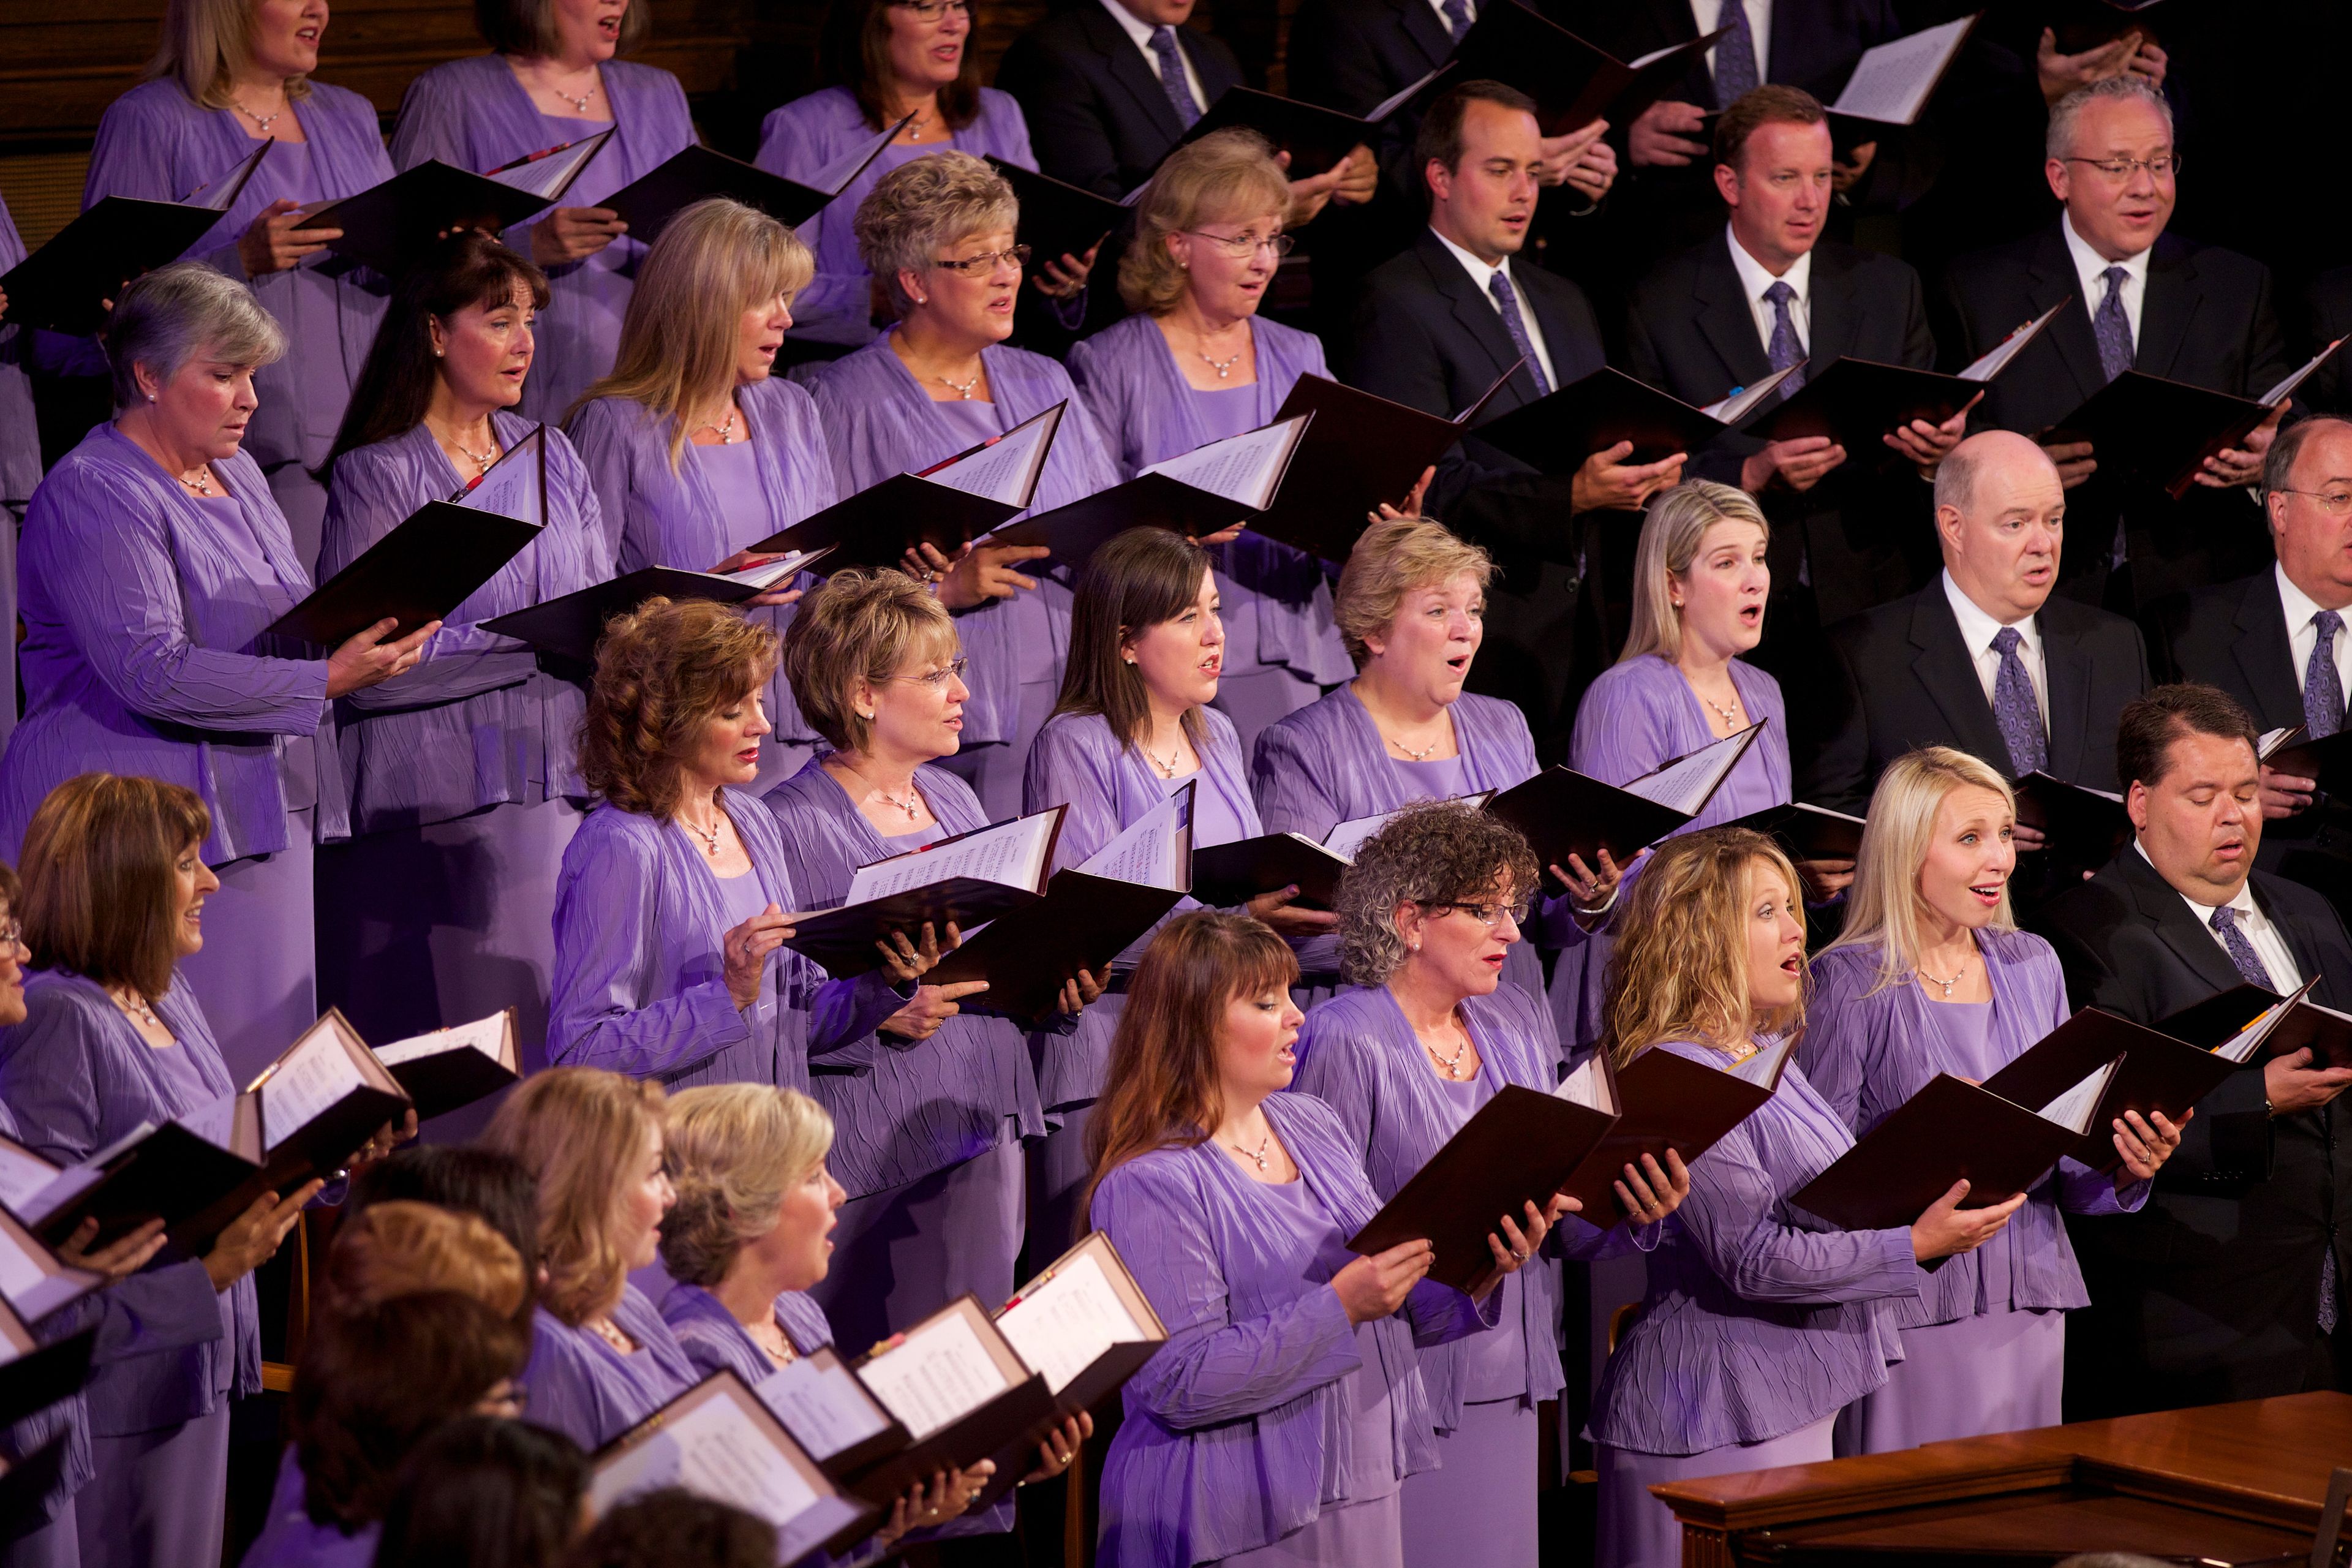 A view of the women of the Mormon Tabernacle Choir in purple dresses at the funeral of President Boyd K. Packer in July 2015.